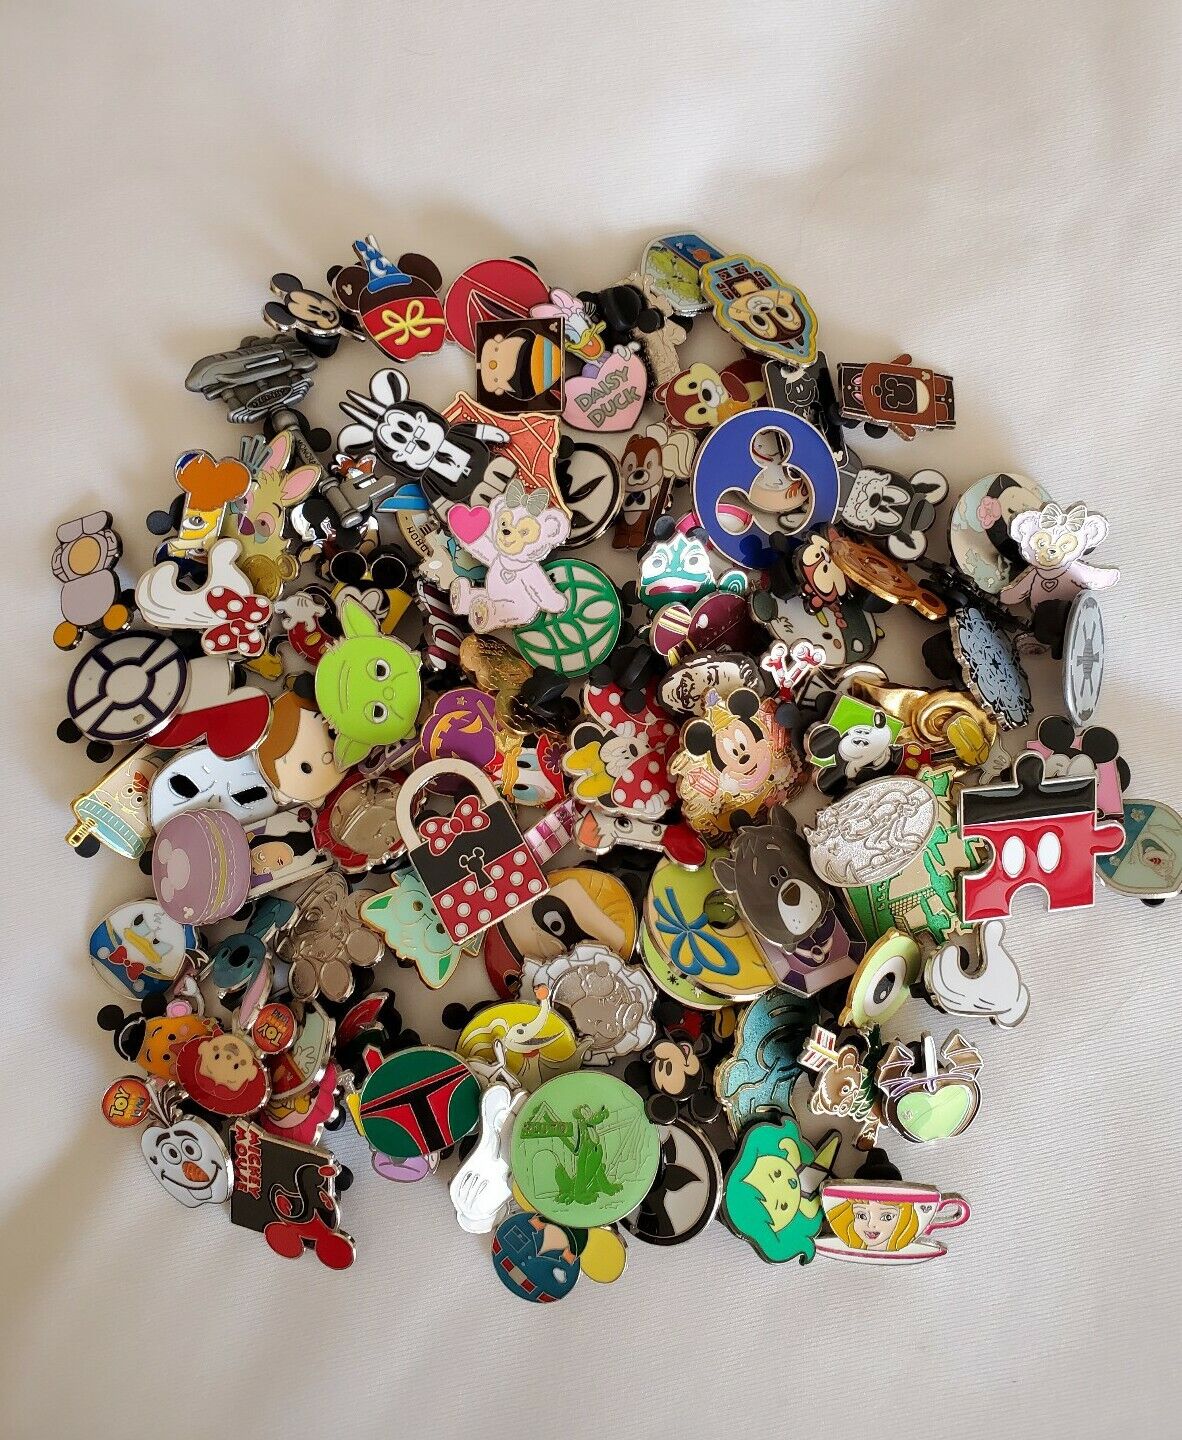 Disney Trading Pin Lot 200 DIFFERENT PINS + 2 Free Lanyard NO DOUBLES Trade 100%